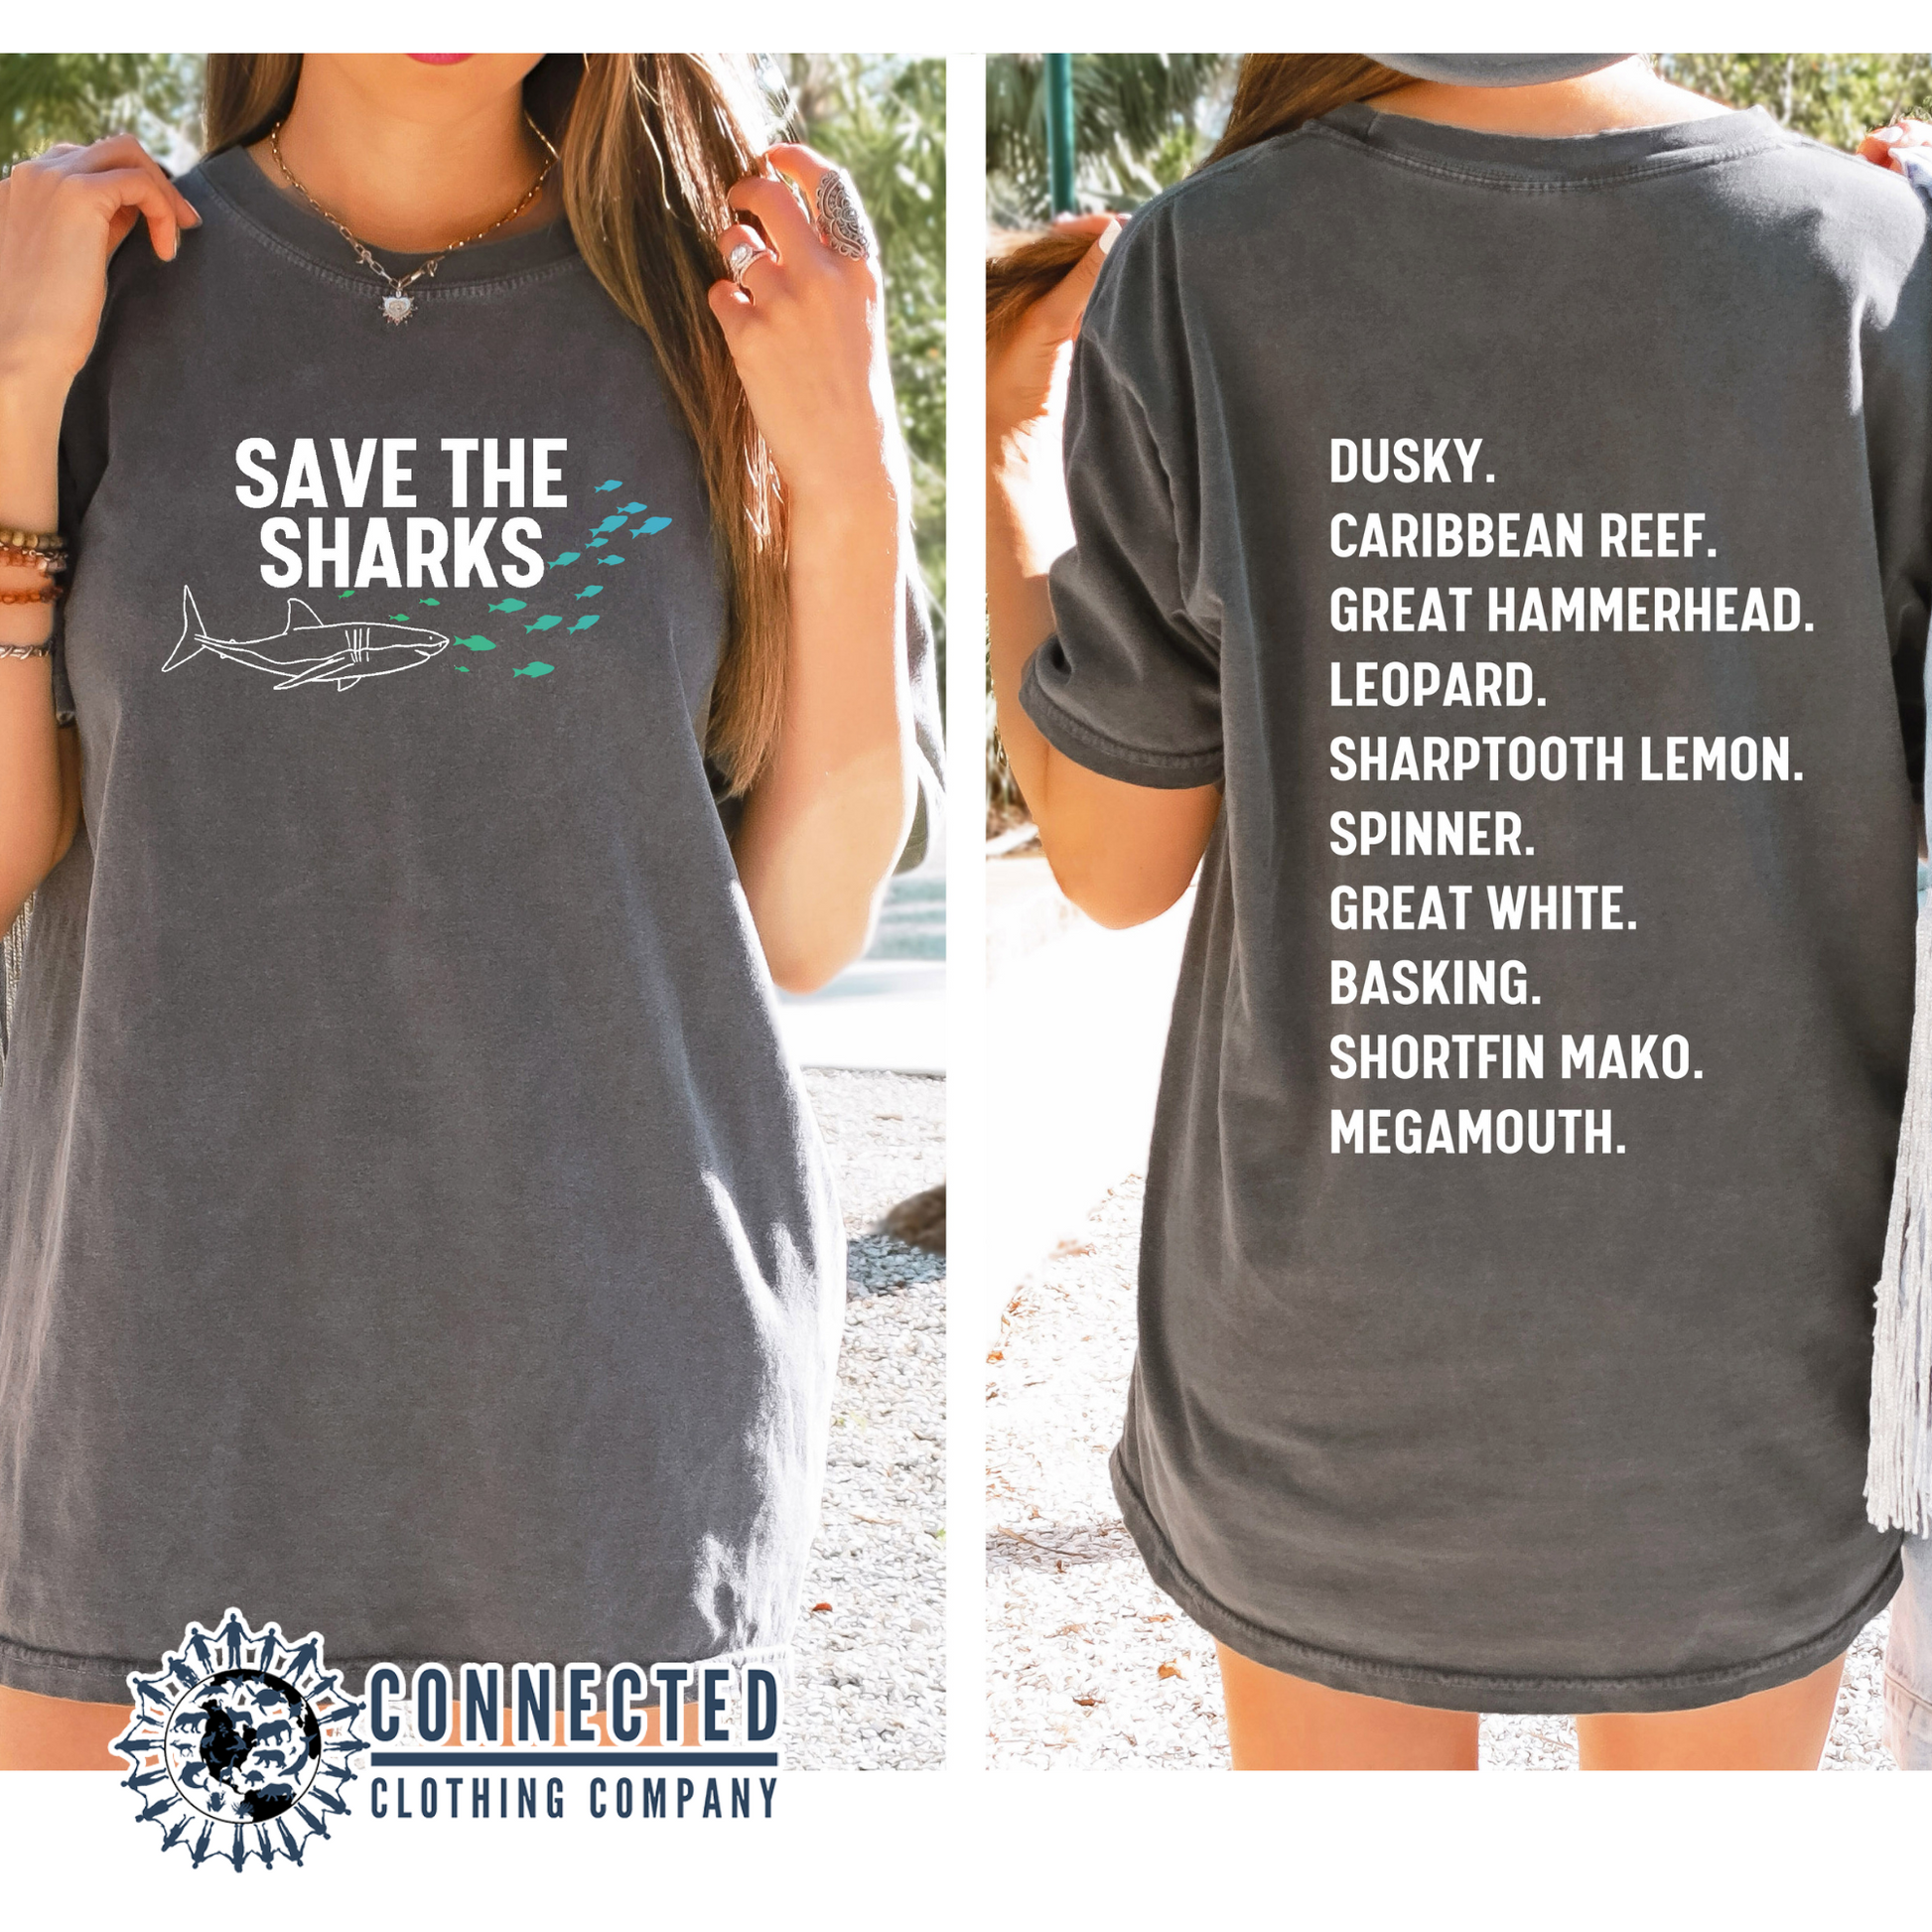 Save The Sharks Species Tee - Connected Clothing Company - 10% donated to shark conservation